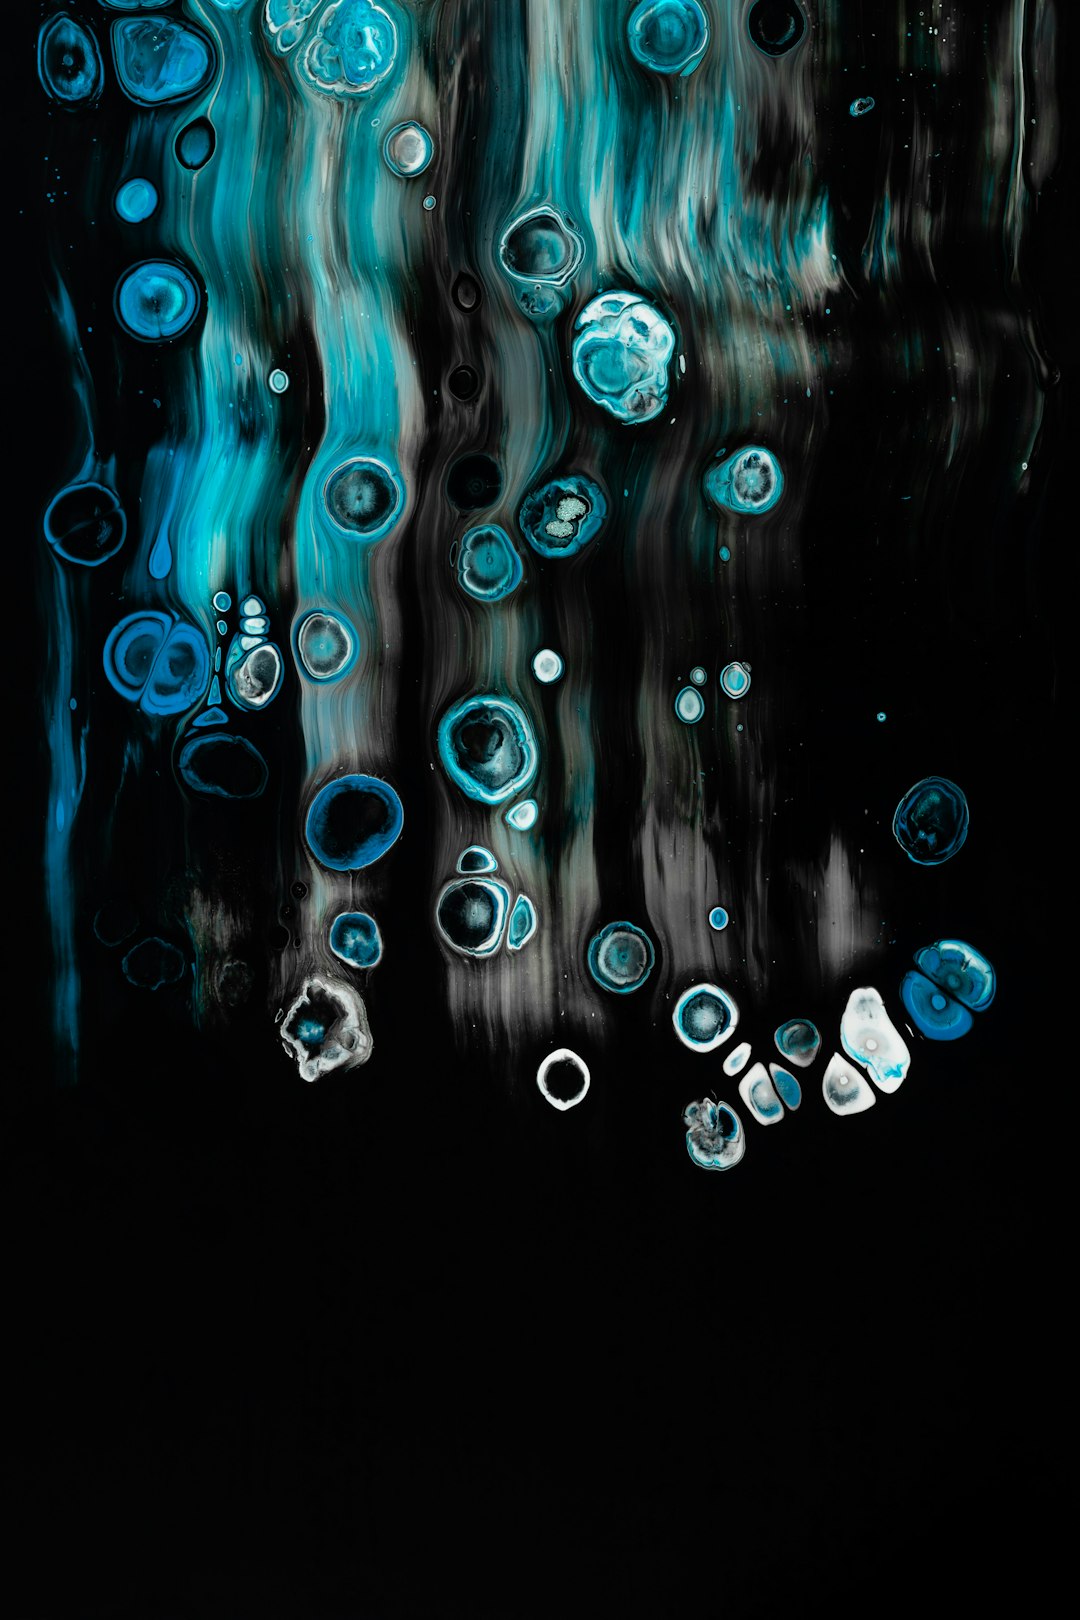 abstract painting of small bubbles on black background, turquoise and blue, dark white and aquamarine, hyperrealistic water drops, glowing light, fluid organic shapes, dark art illustration, dark art, dark turquoise color scheme, dark art style, dark art, dark cyan and black, fluid organic forms, dark blue and black, dark background, dark turquoise and skyblue colors, dark black and gray background, dark green and azure blue, dark grey background, dark gray and skyblue –ar 85:128